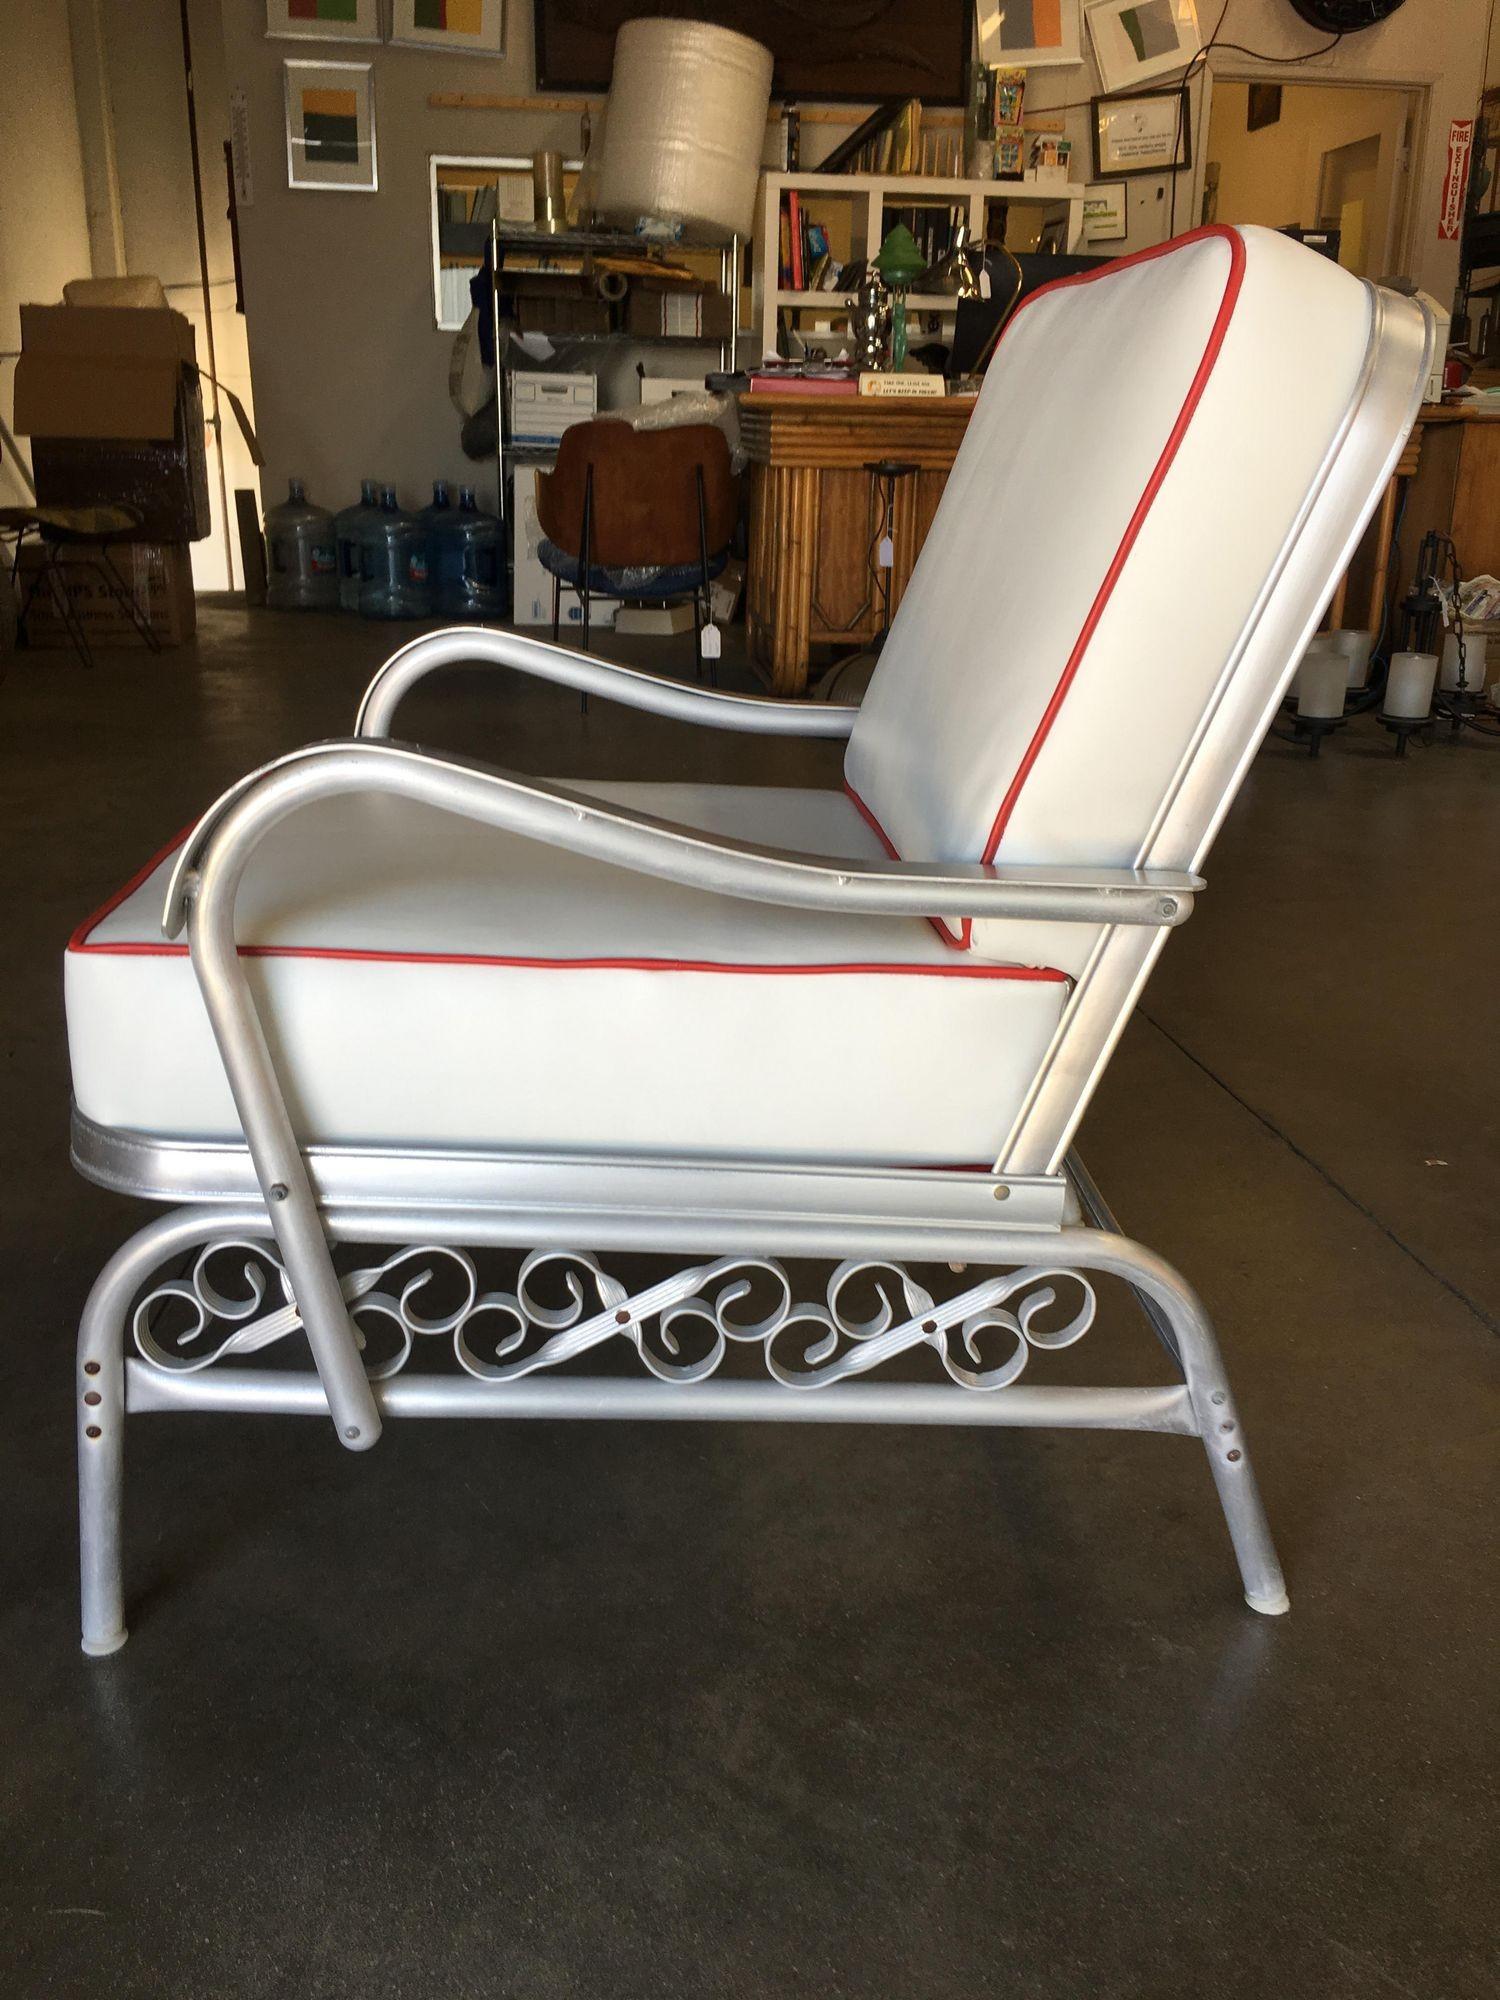 Mid-century patio/outdoor lounge chair consisting of an aluminum body with decorative scrolling patterns along the side. This large outdoor lounge chair is consistent with the size of lounge chairs normally found in the living room with a deeper